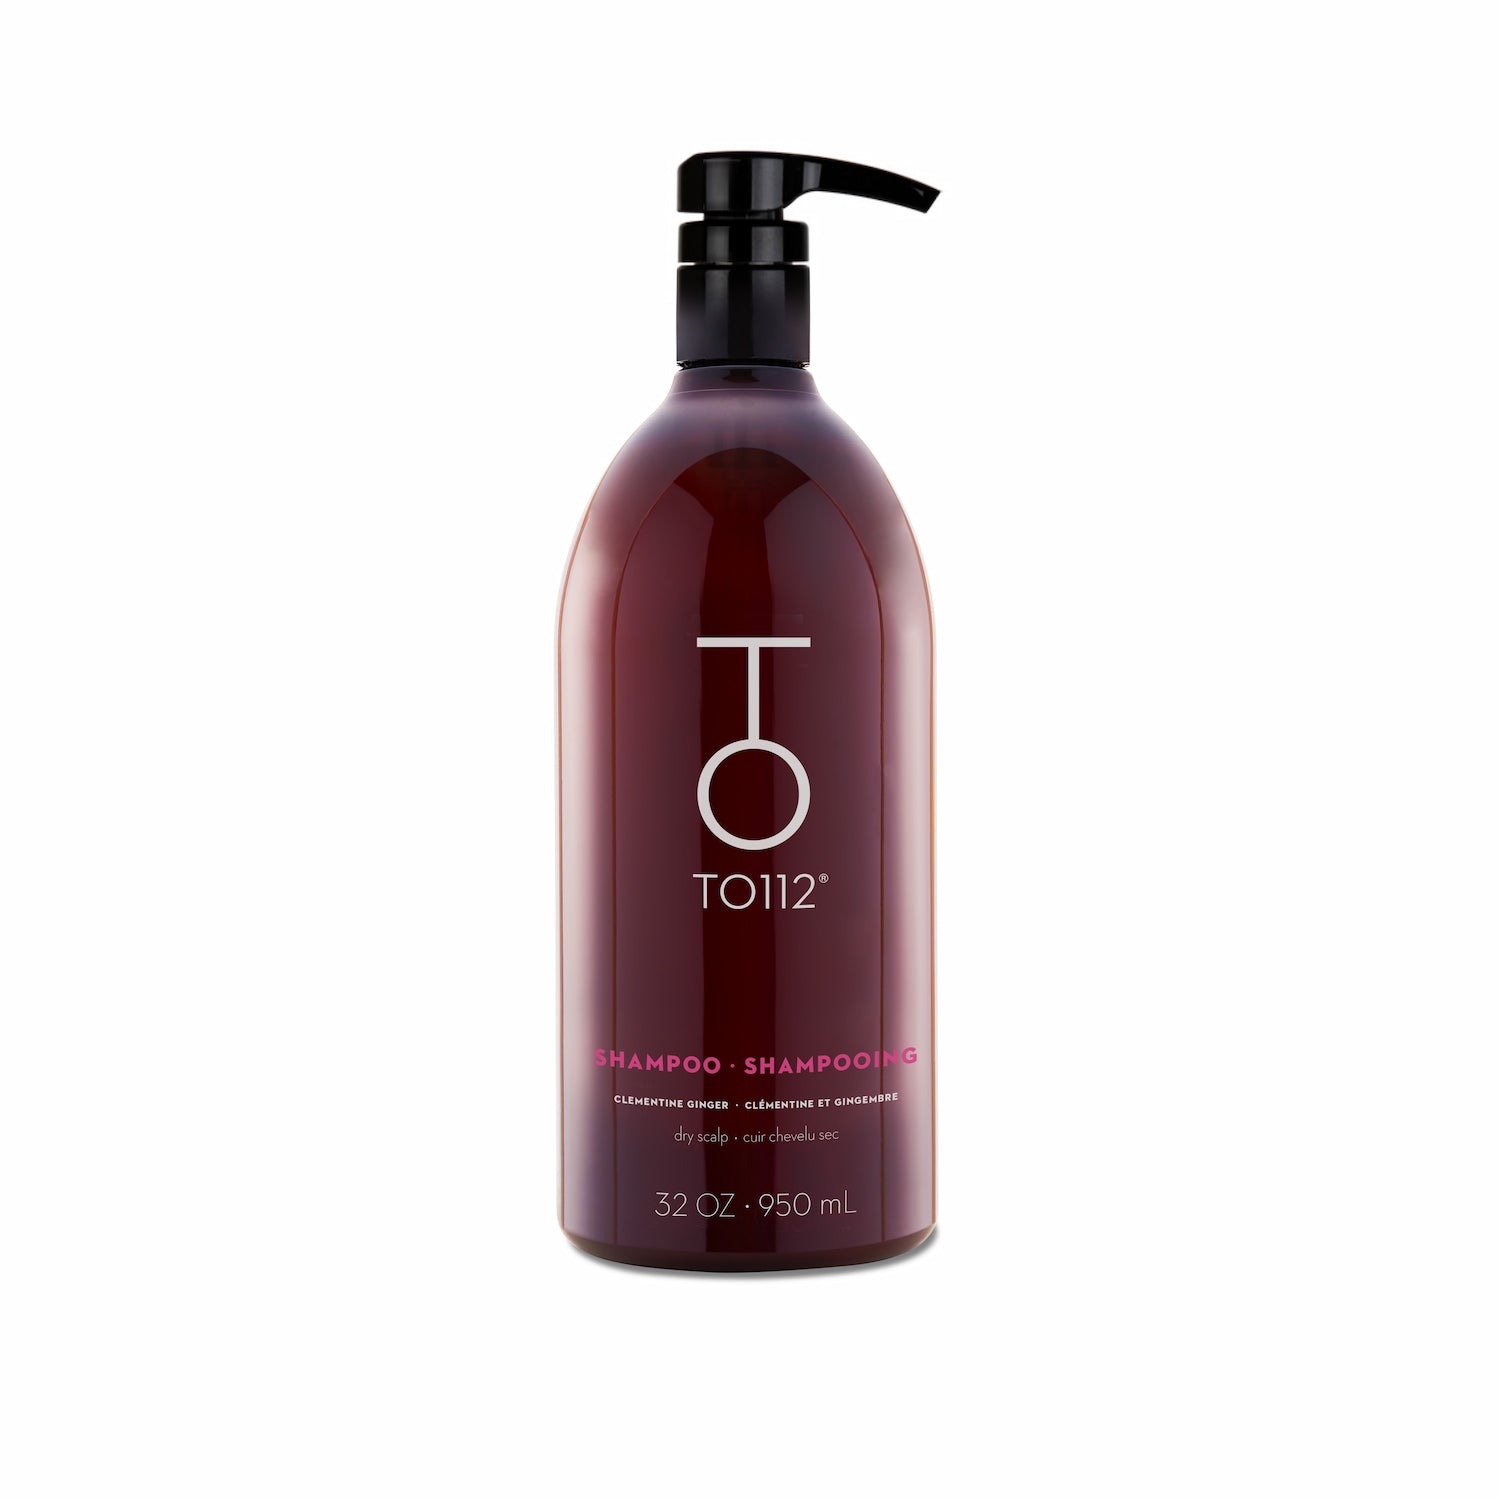 TO112 Shampoo for Dry Hair & Dry Scalps 32oz size